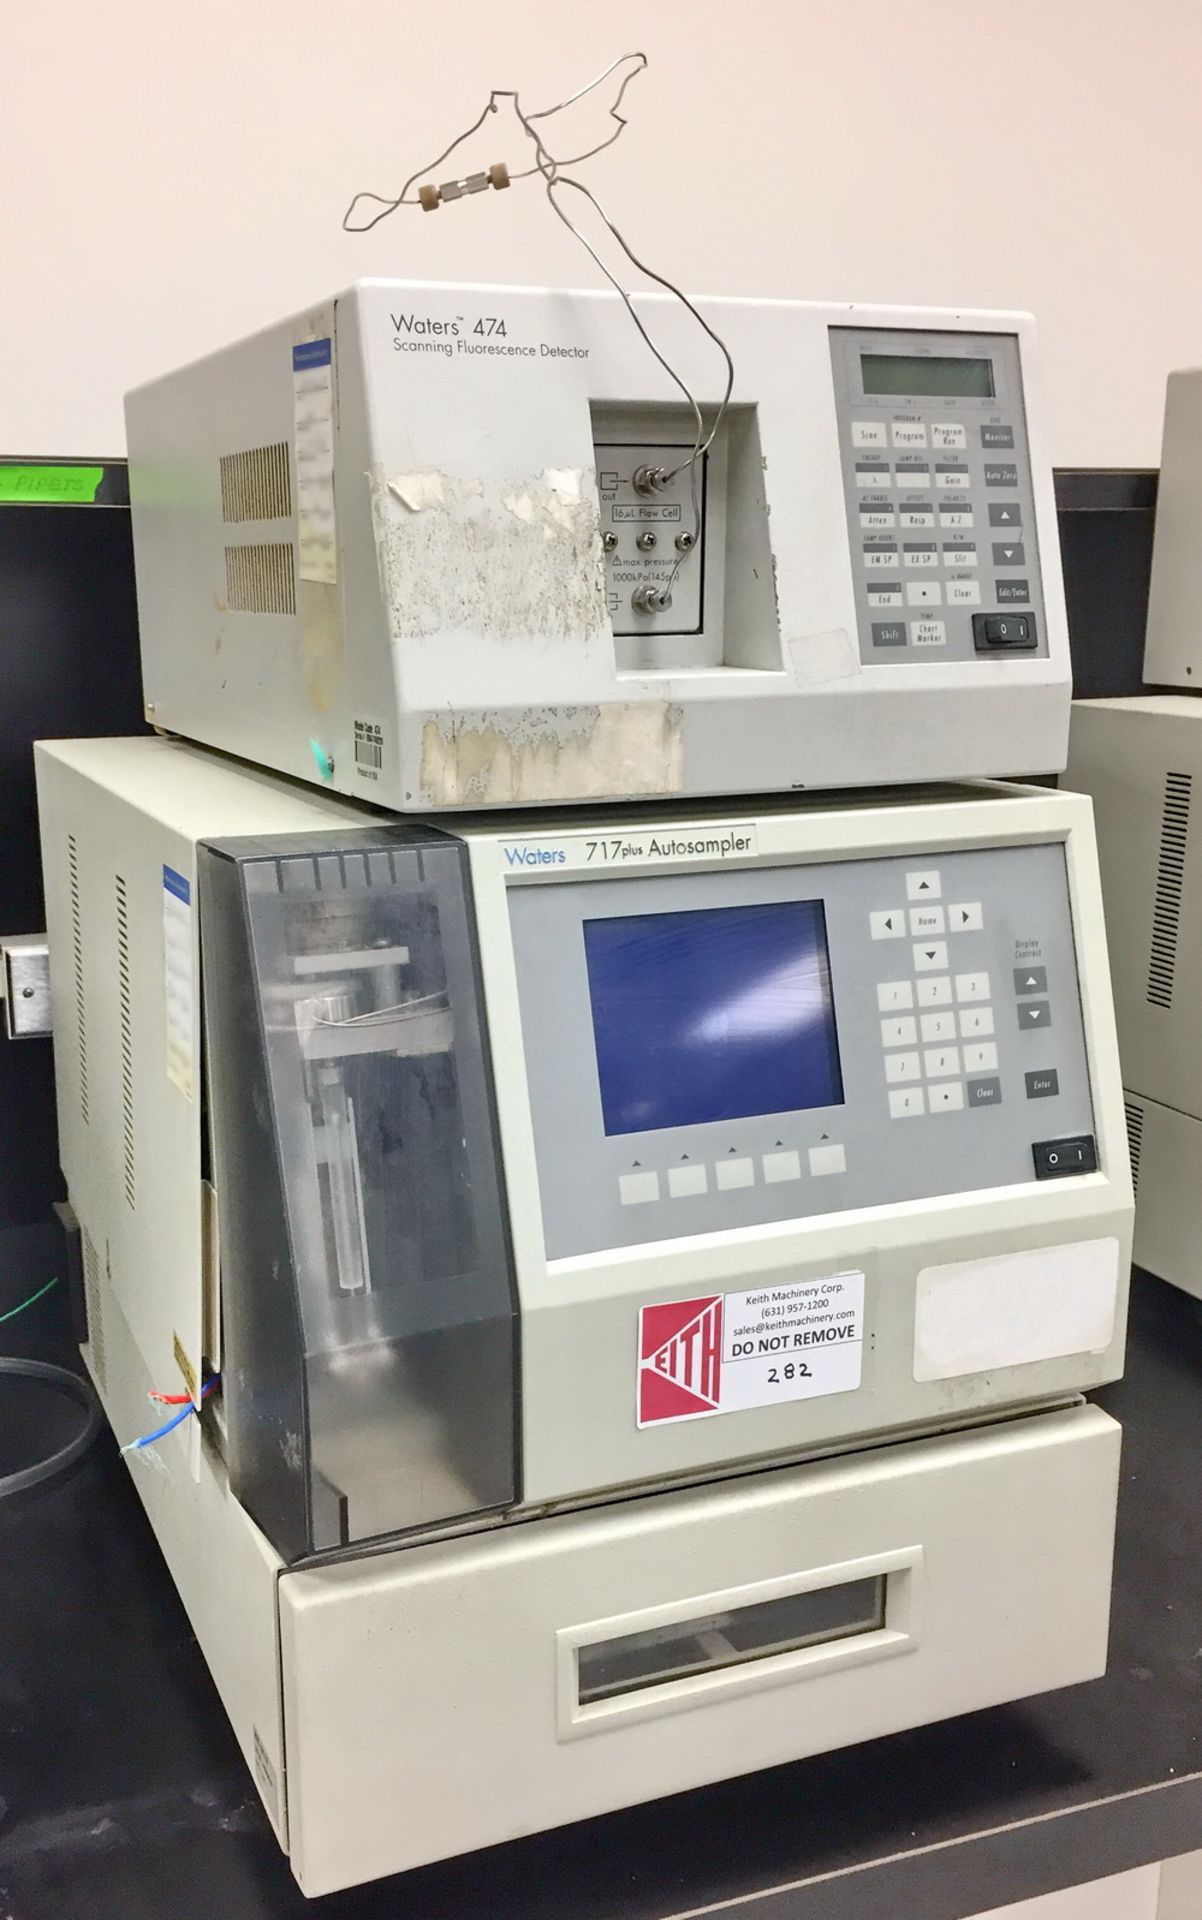 Waters HPLC Components 717 plus Auto Sampler, 474 scanning fluorescence detector.